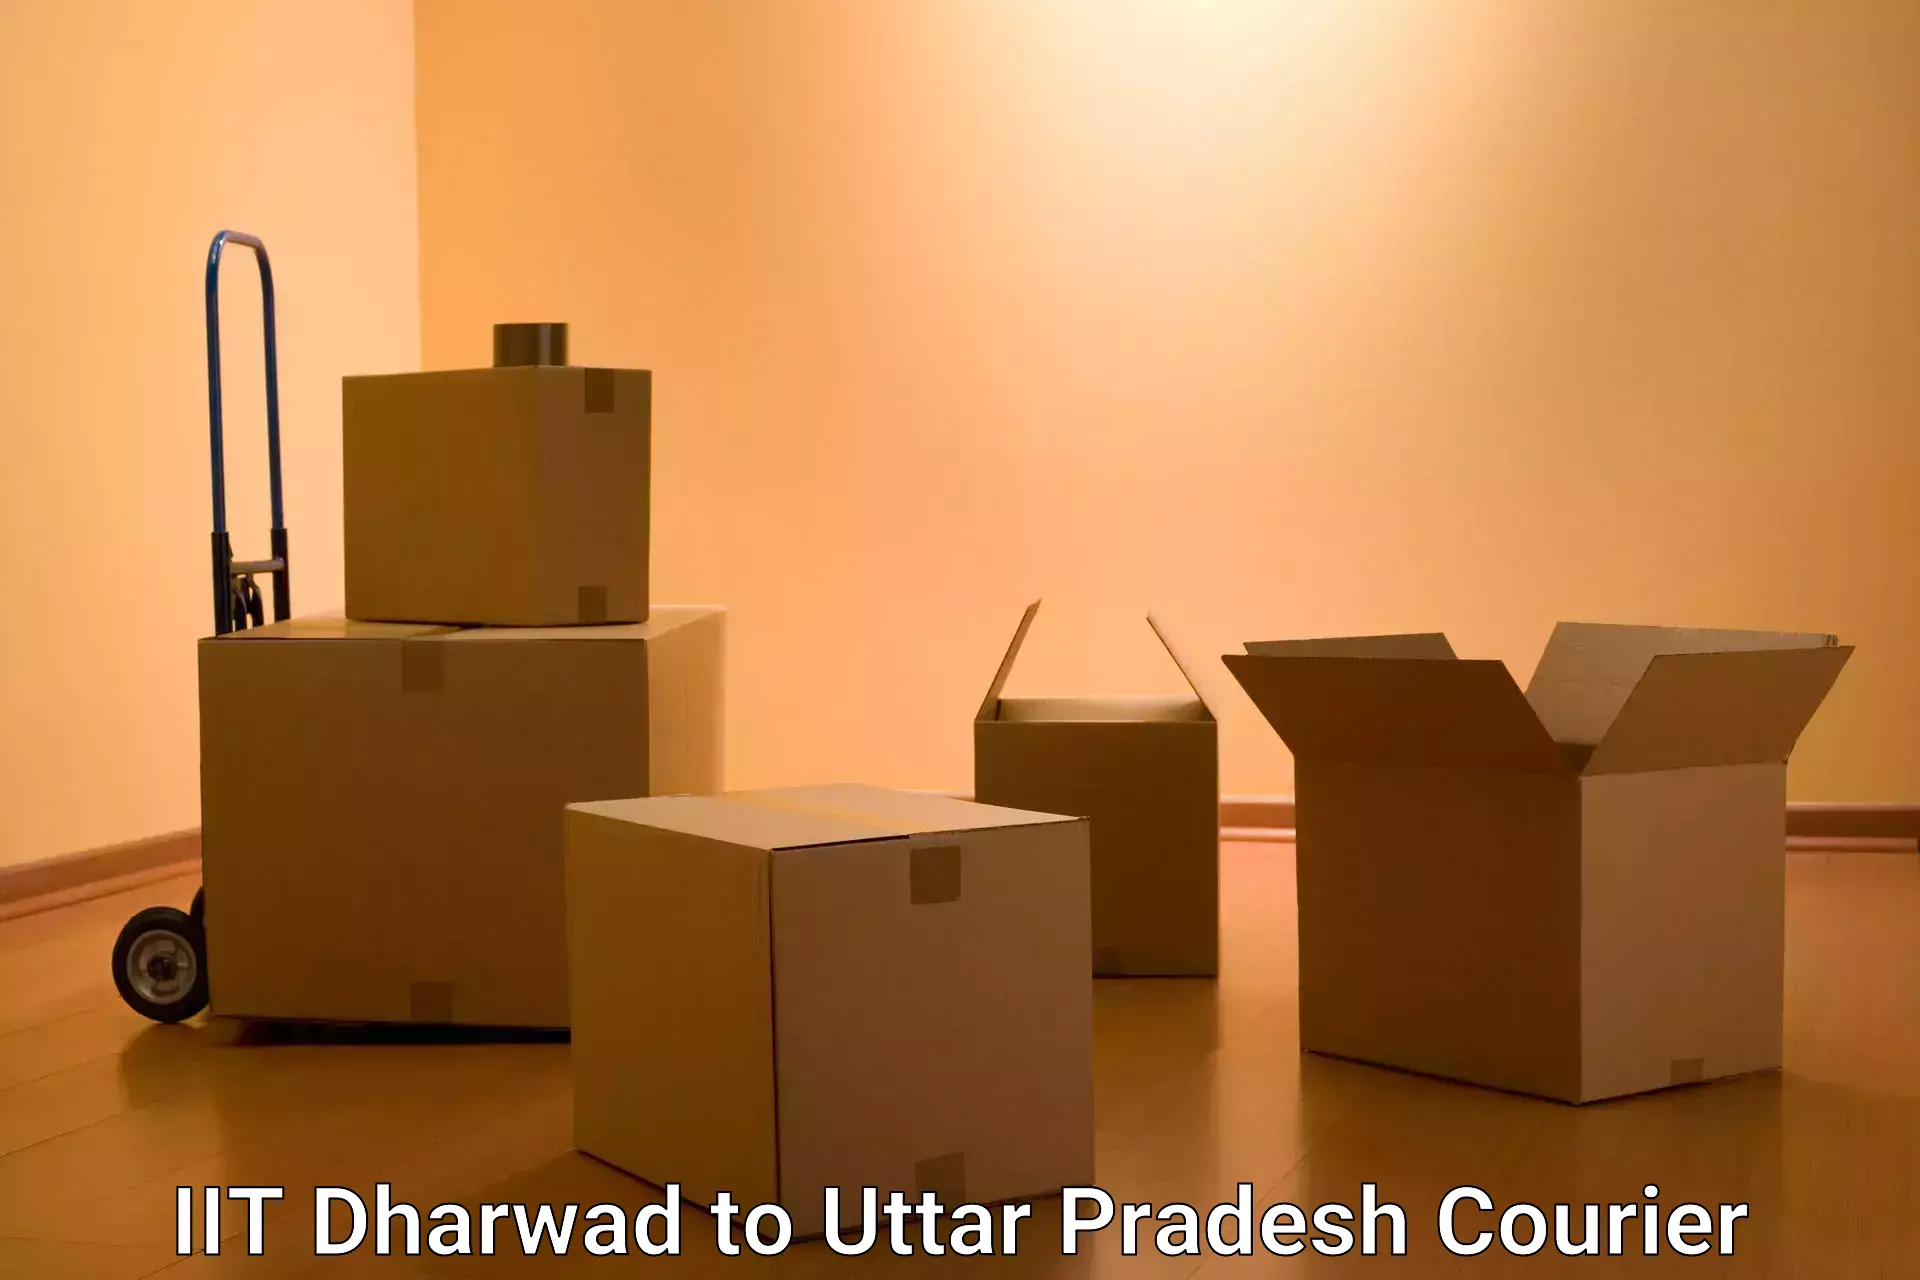 Business delivery service IIT Dharwad to Aligarh